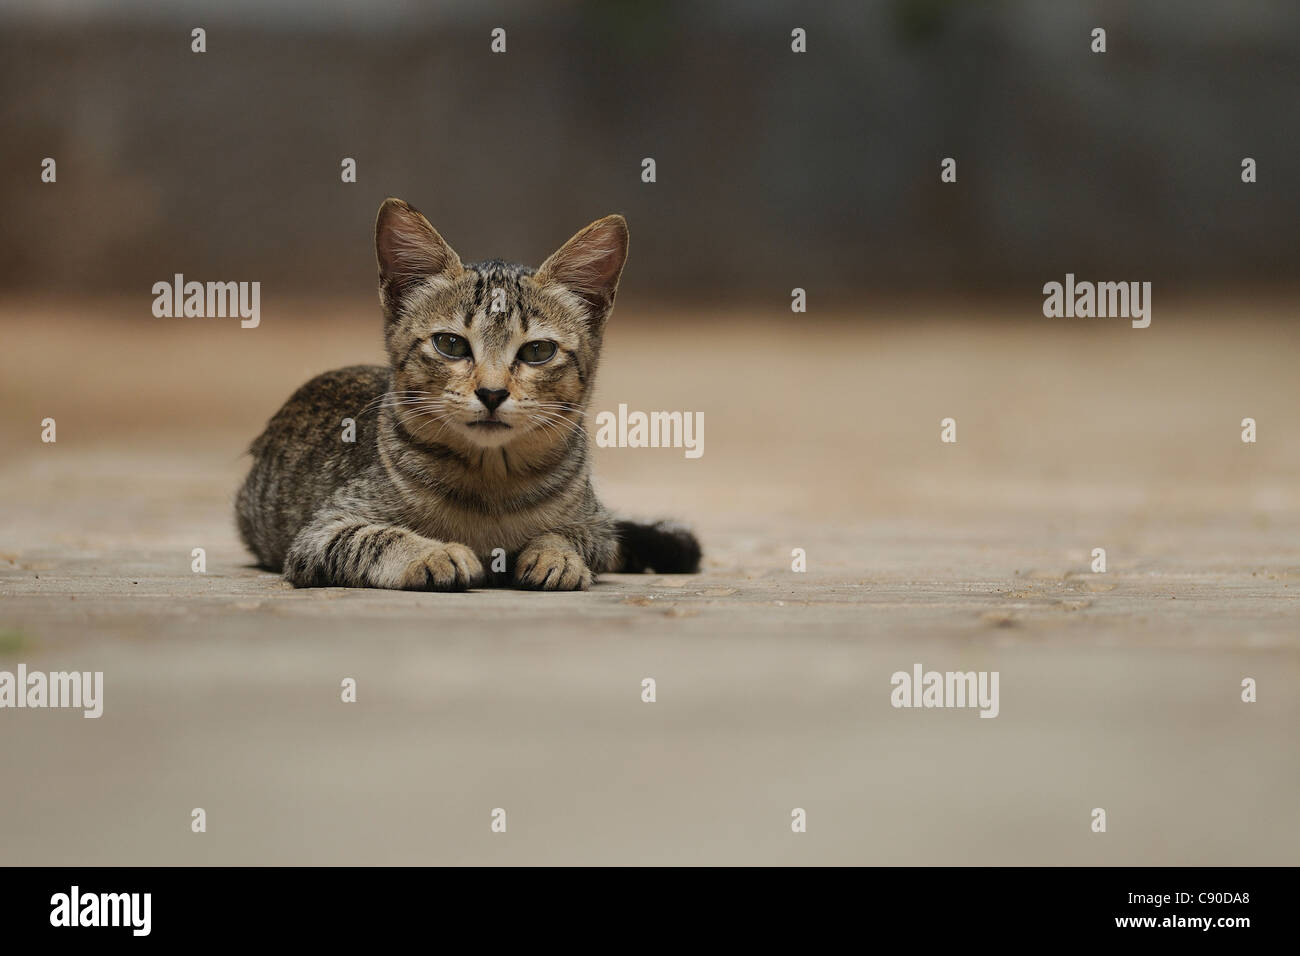 Ground-level head-on photograph of a domestic (feral) kitten in a wildlife resort outside Bandipur National Park, India Stock Photo